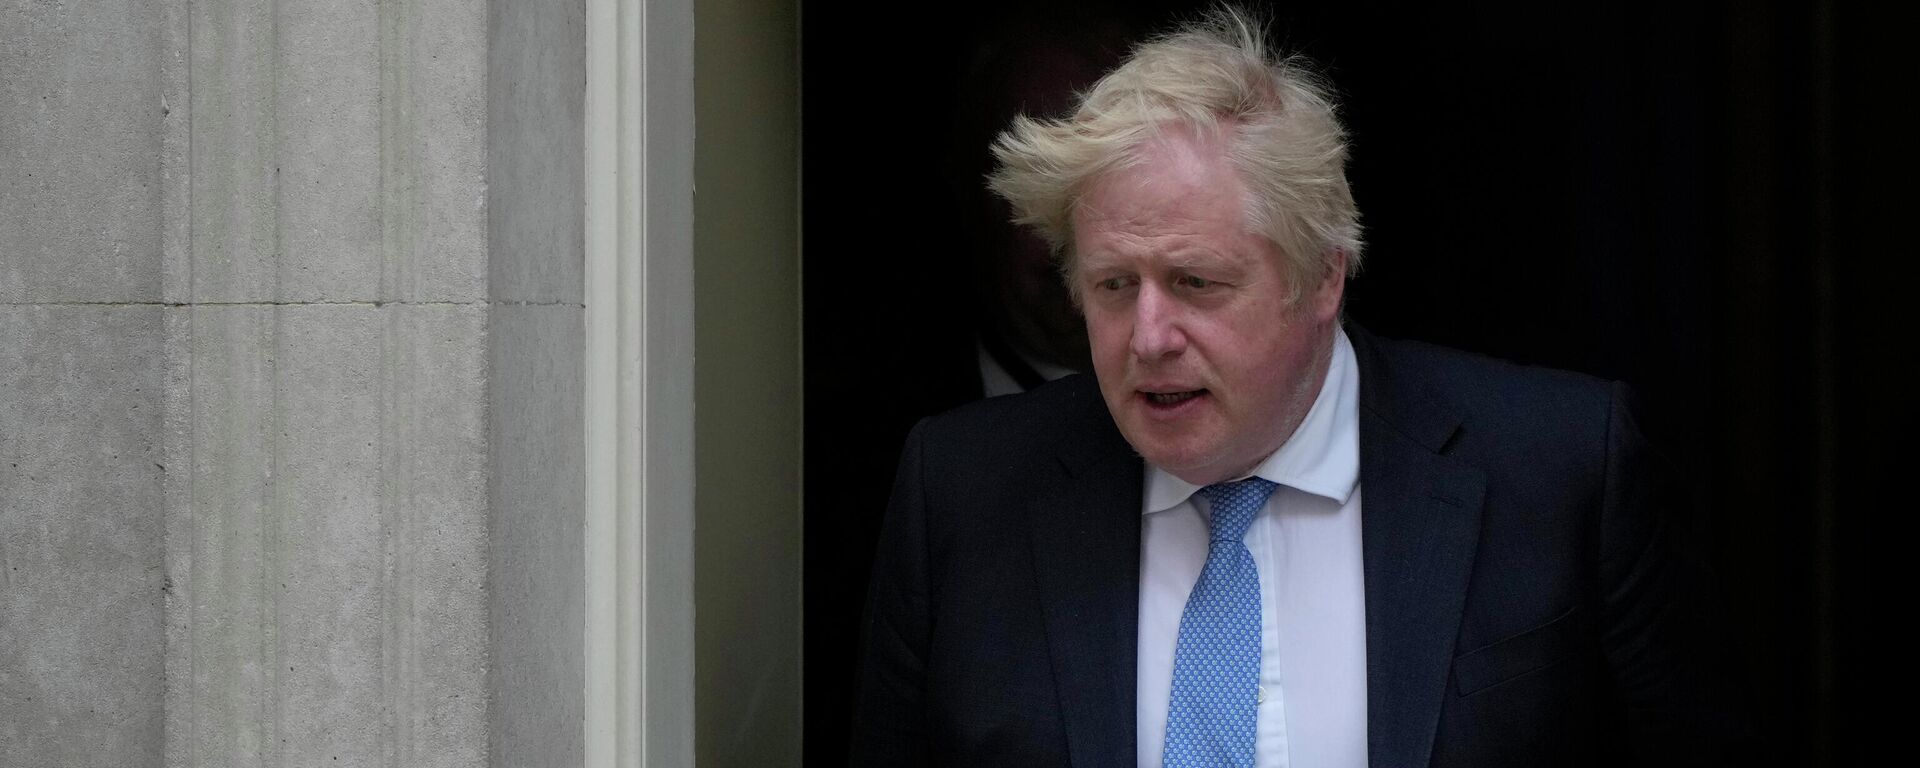 Britain's Prime Minister Boris Johnson leaves 10 Downing Street for the House of Commons to make a statement about Downing Street parties during the coronavirus lockdowns in London, Tuesday, April 19, 2022 - Sputnik International, 1920, 28.05.2022